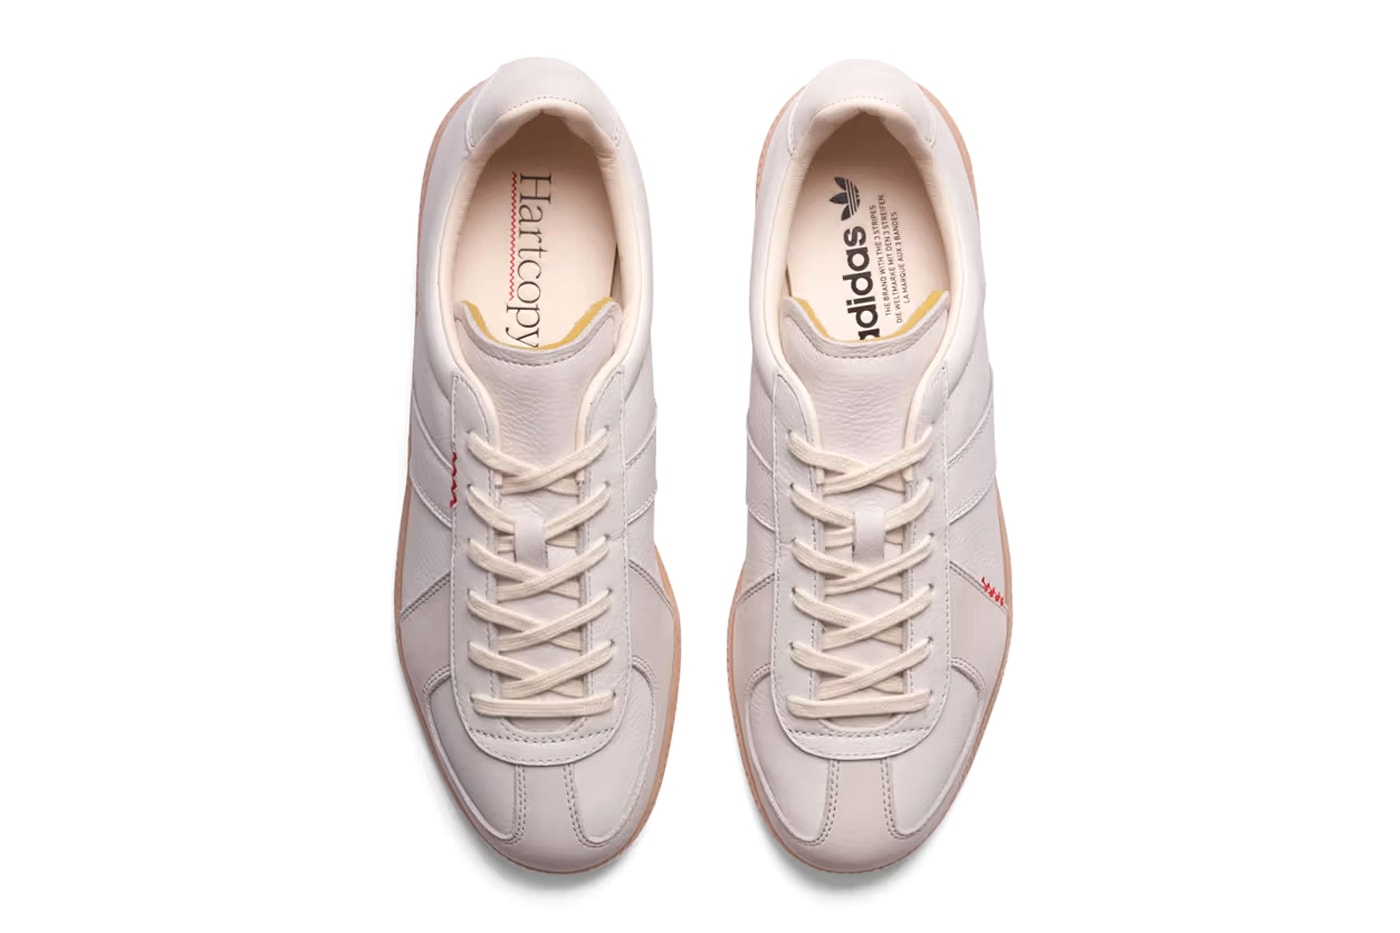 Hartcopy adidas BW Army White Release Info date store list buying guide photos price